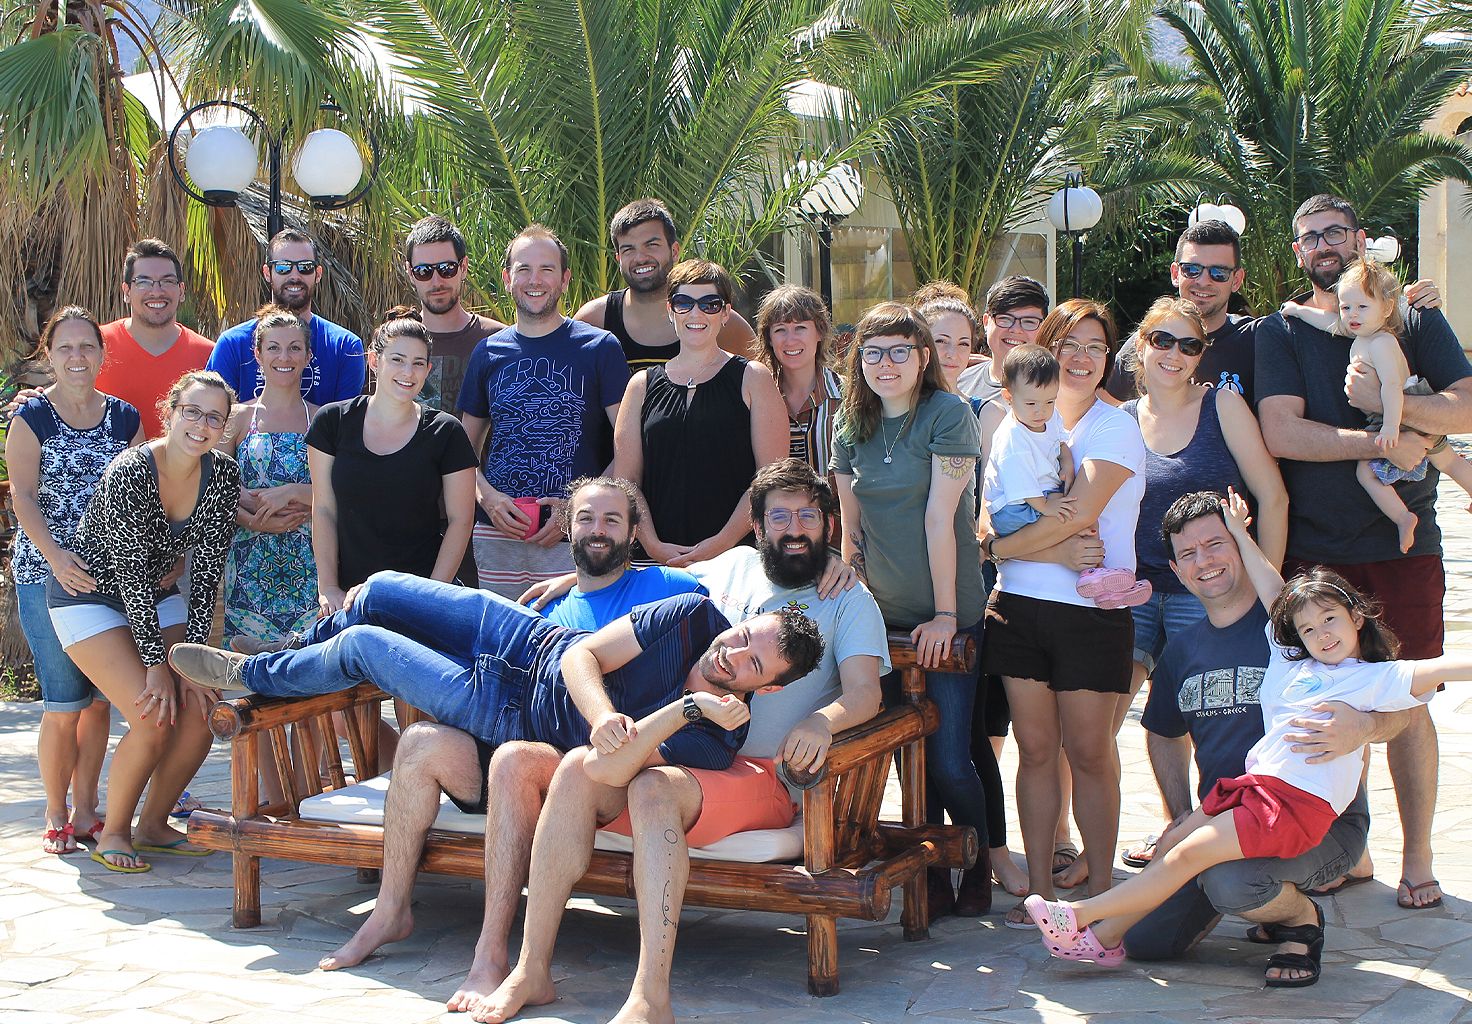 A group photo of the Cliniko team and family members in Greece.